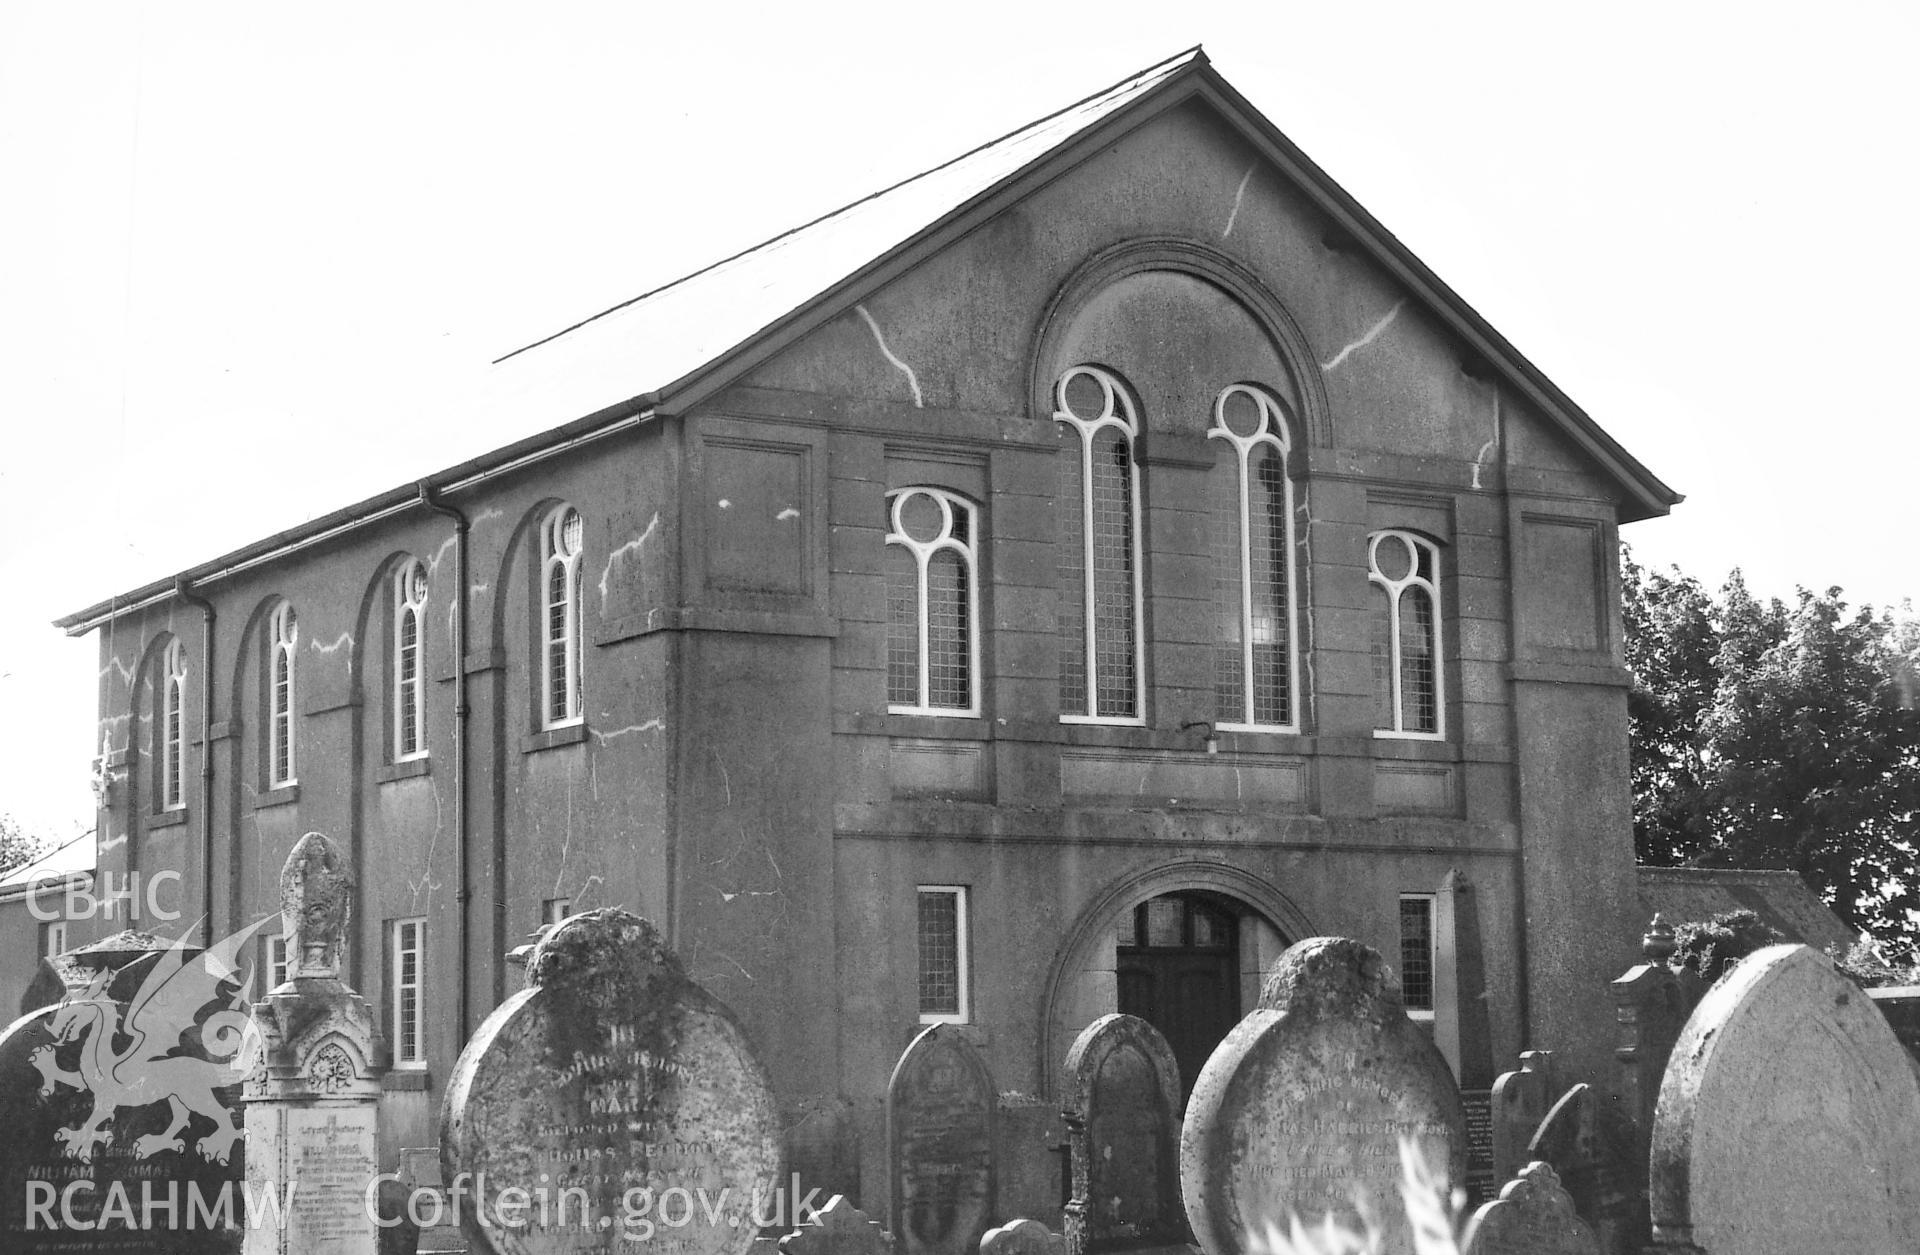 Digital copy of a black and white photograph showing a general view of Pisgah Independent Chapel. Llandyssilio, taken by Robert Scourfield, 1995.